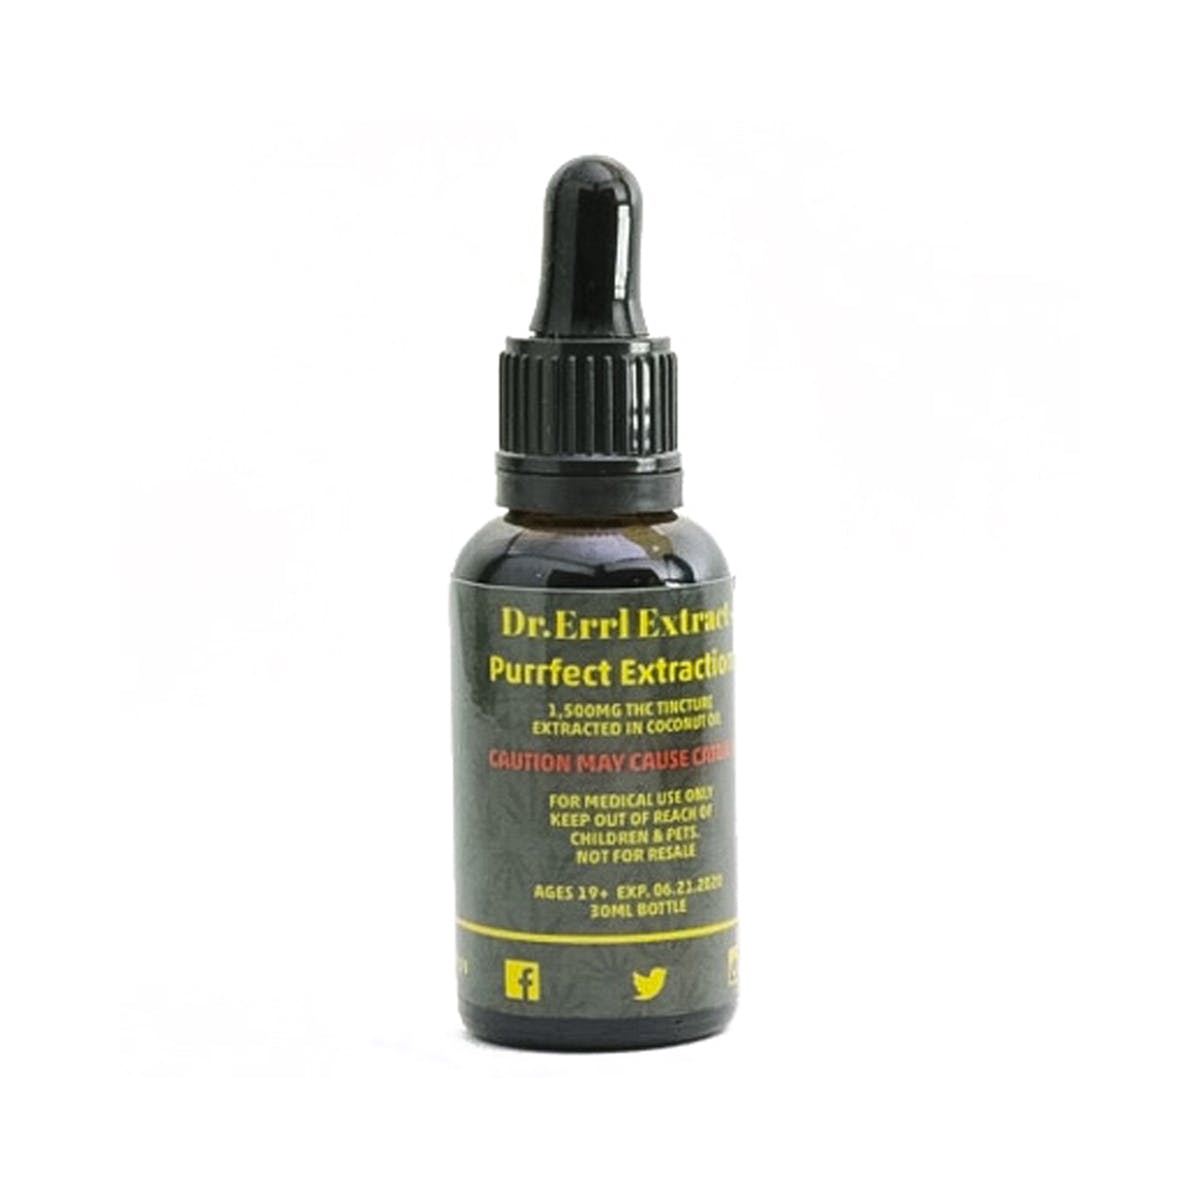 Purrfect Extractions 1500mg THC Tincture